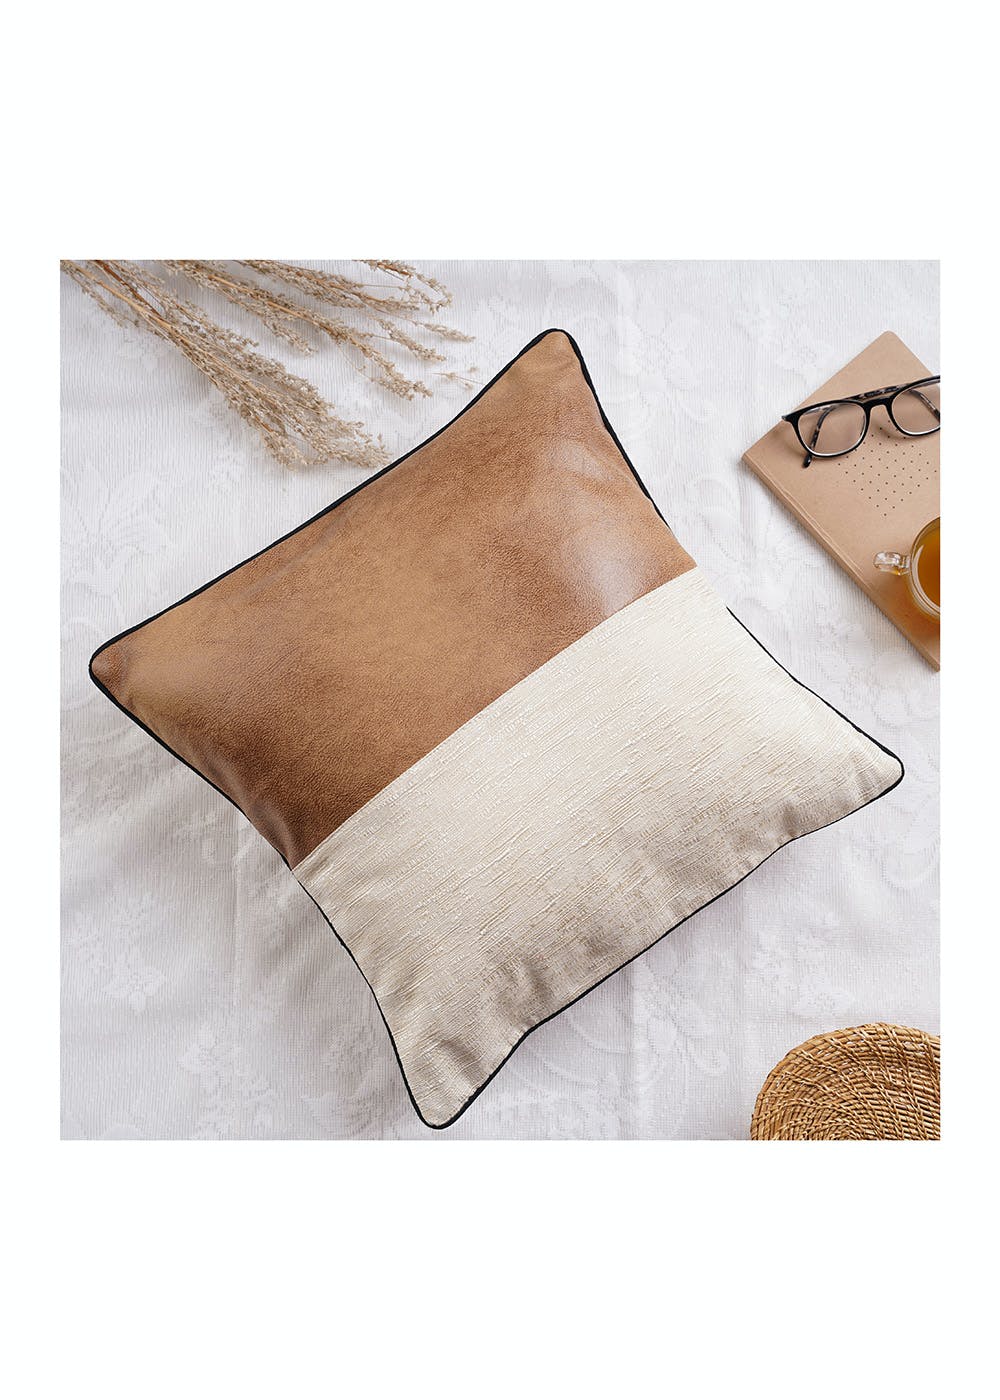 Get Brown Leather Cushion Cover At, Faux Leather Cushion Covers